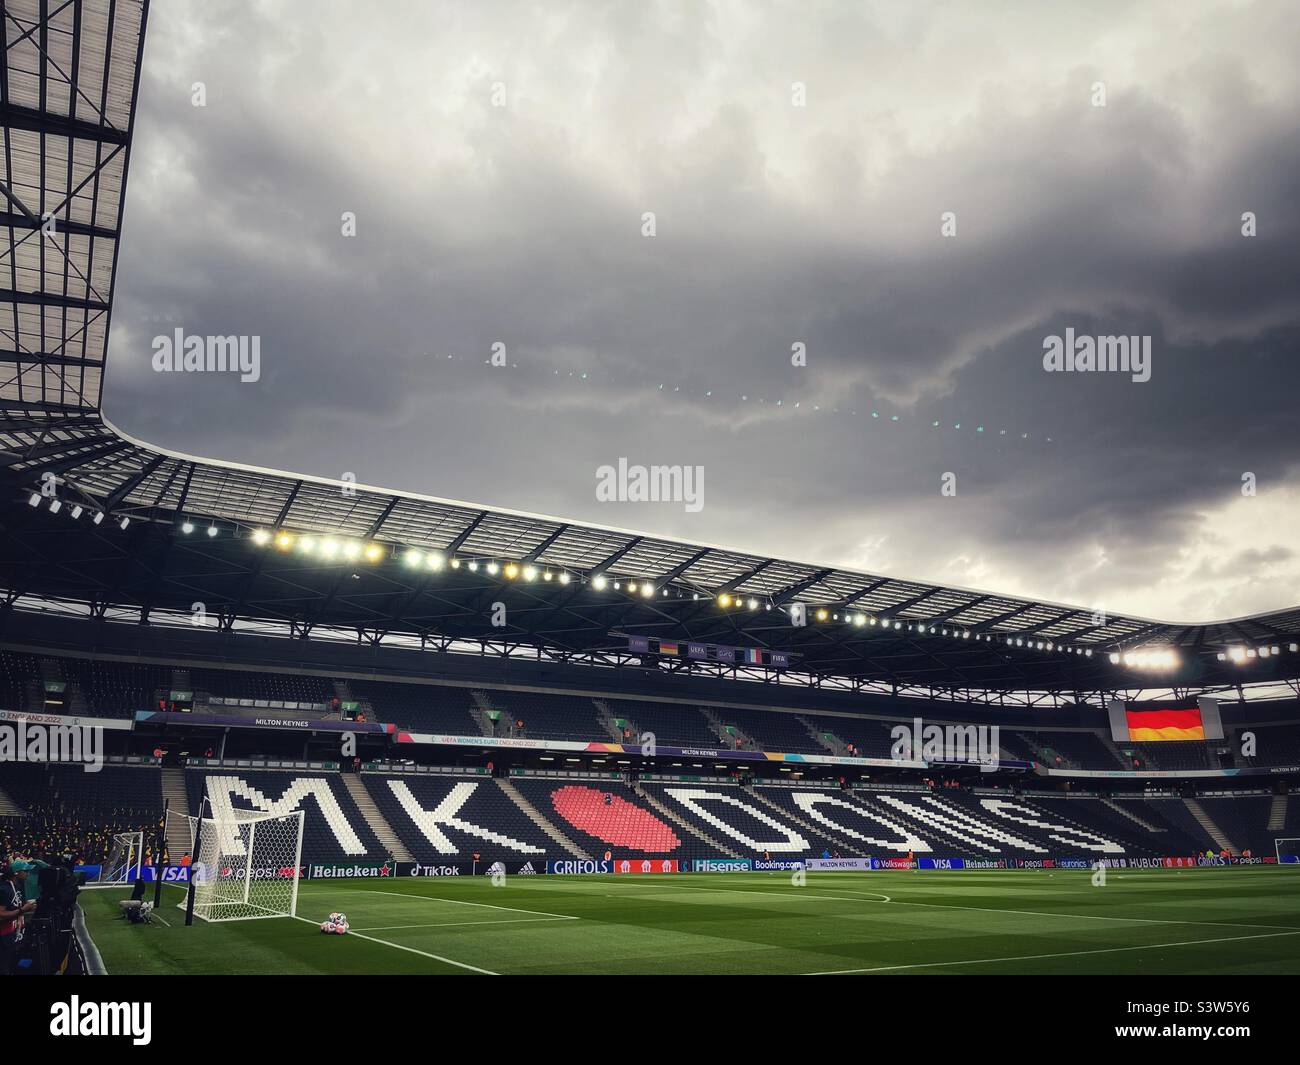 A general view of Stadium MK home to League One side Milton Keynes Dons. The stadium hosted a semi-final of the Women’s Euros between Germany and France. Stock Photo